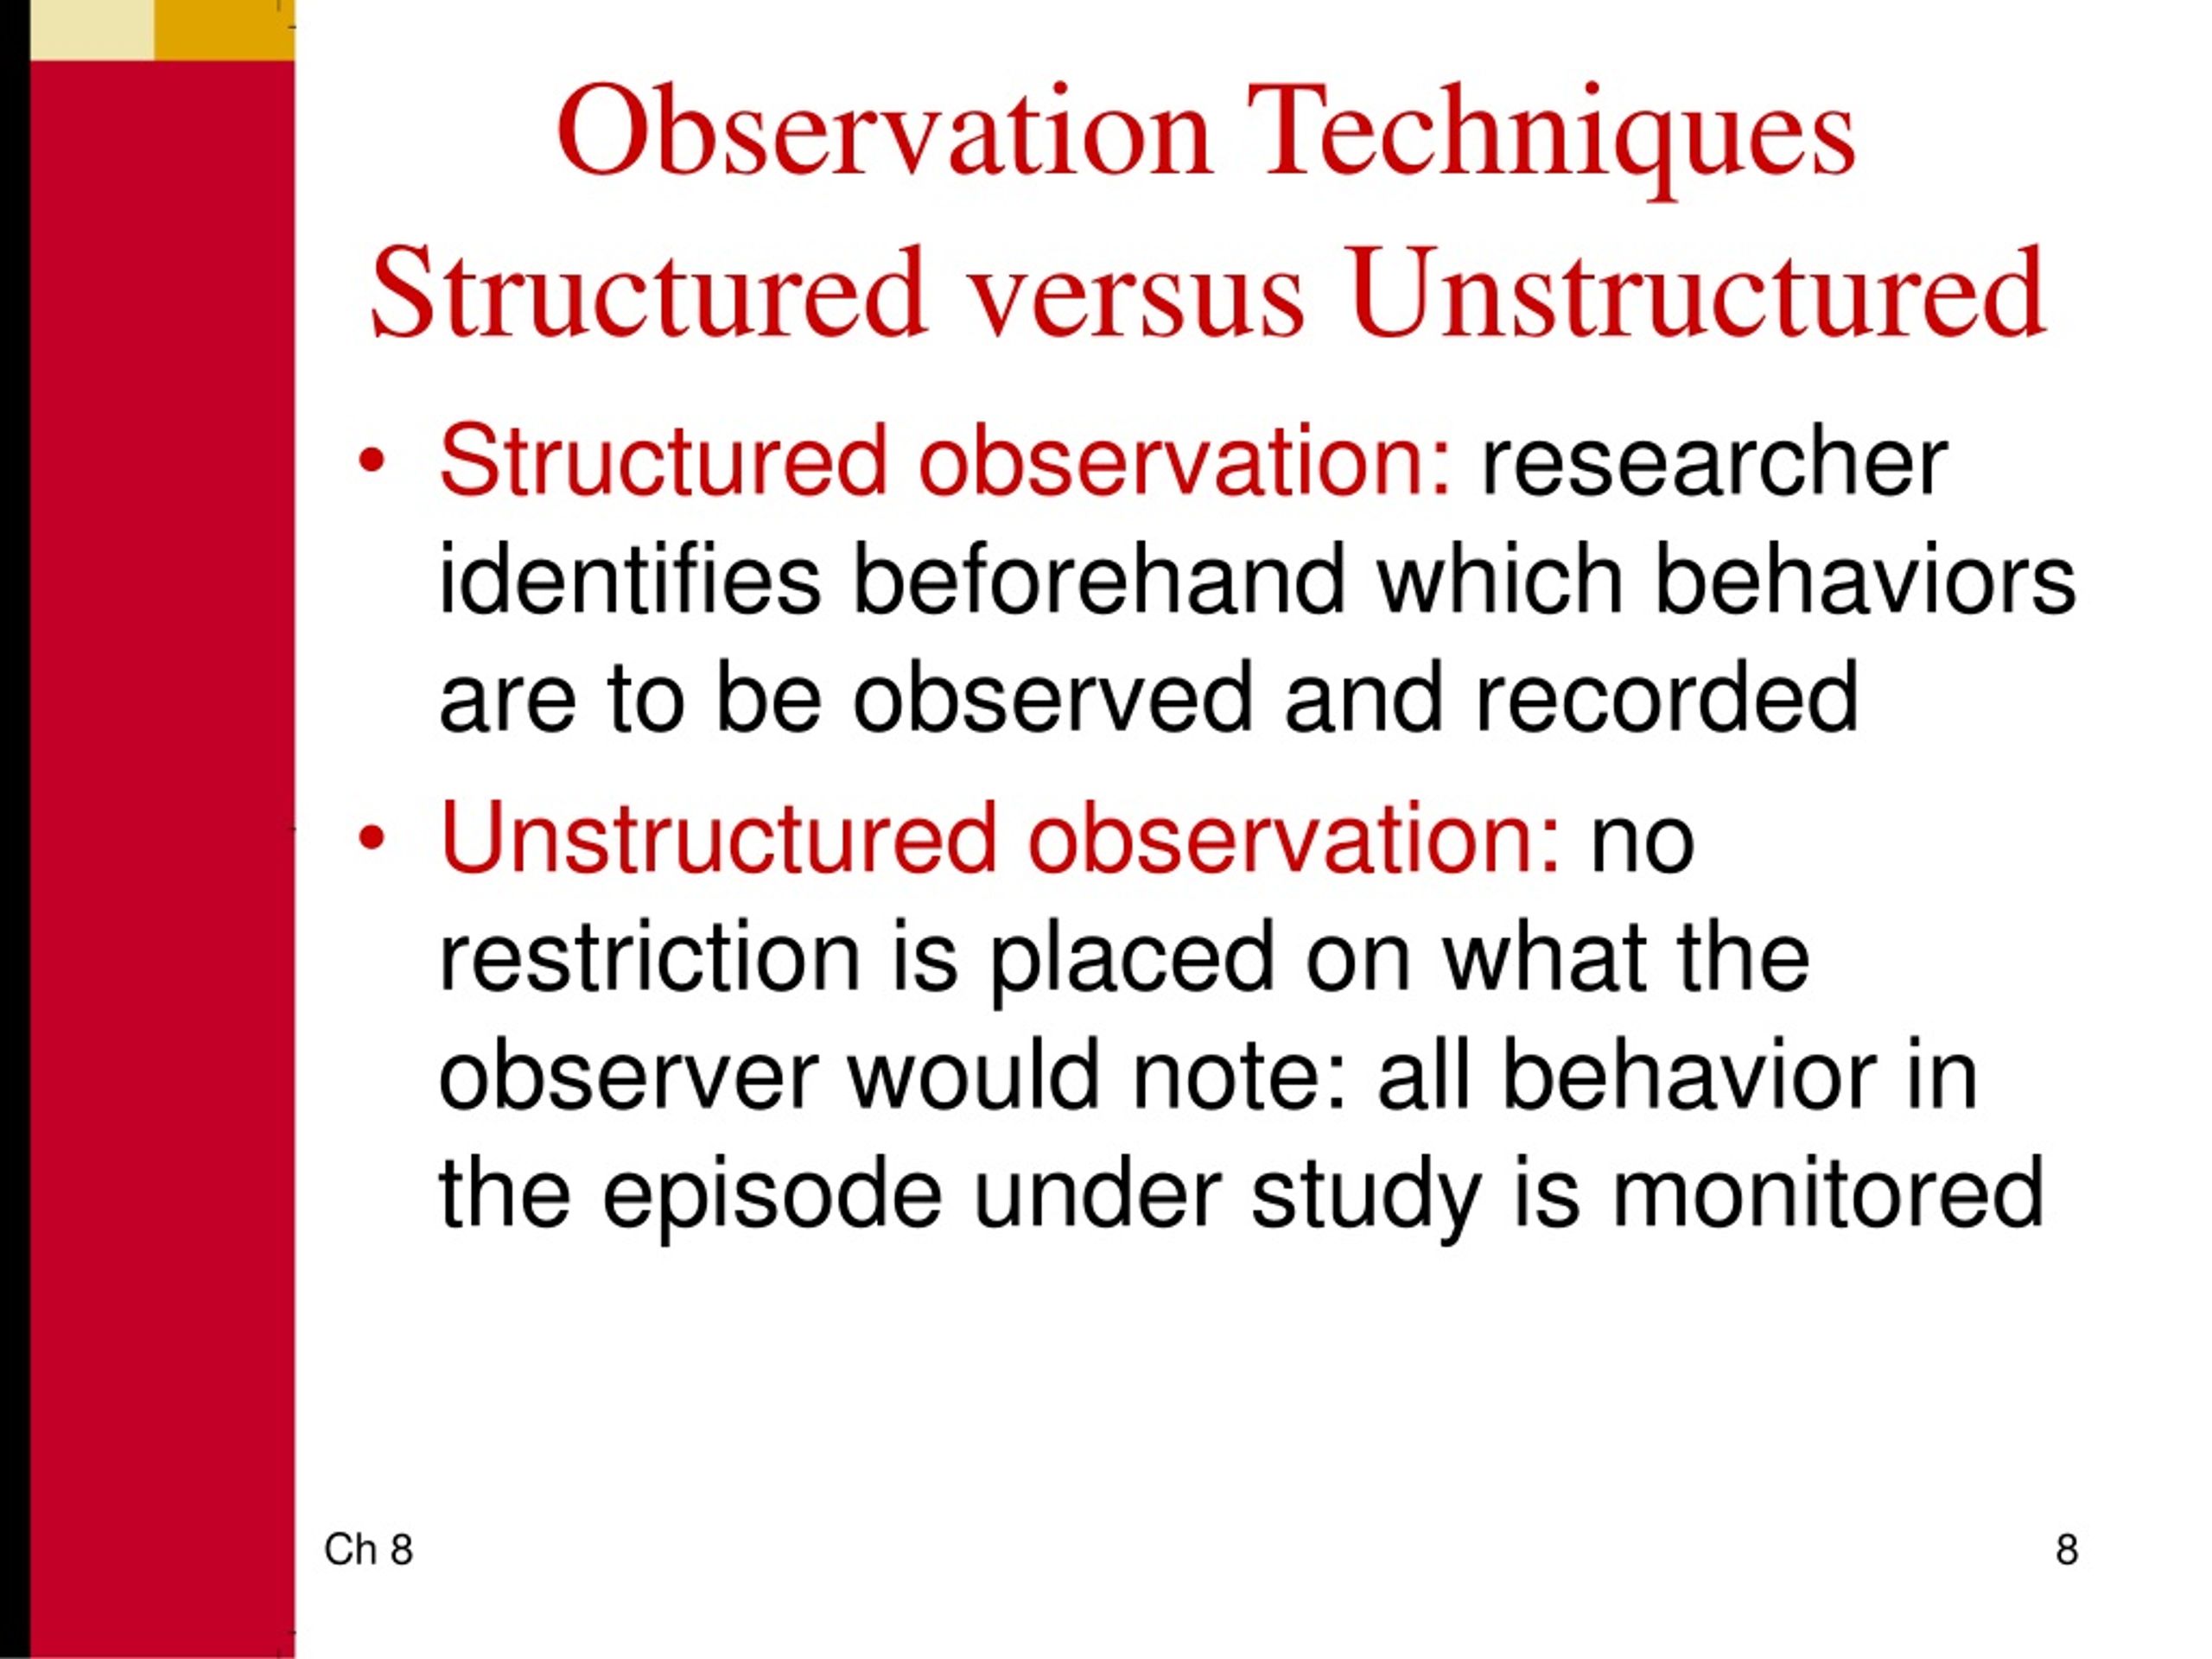 structured observation qualitative research